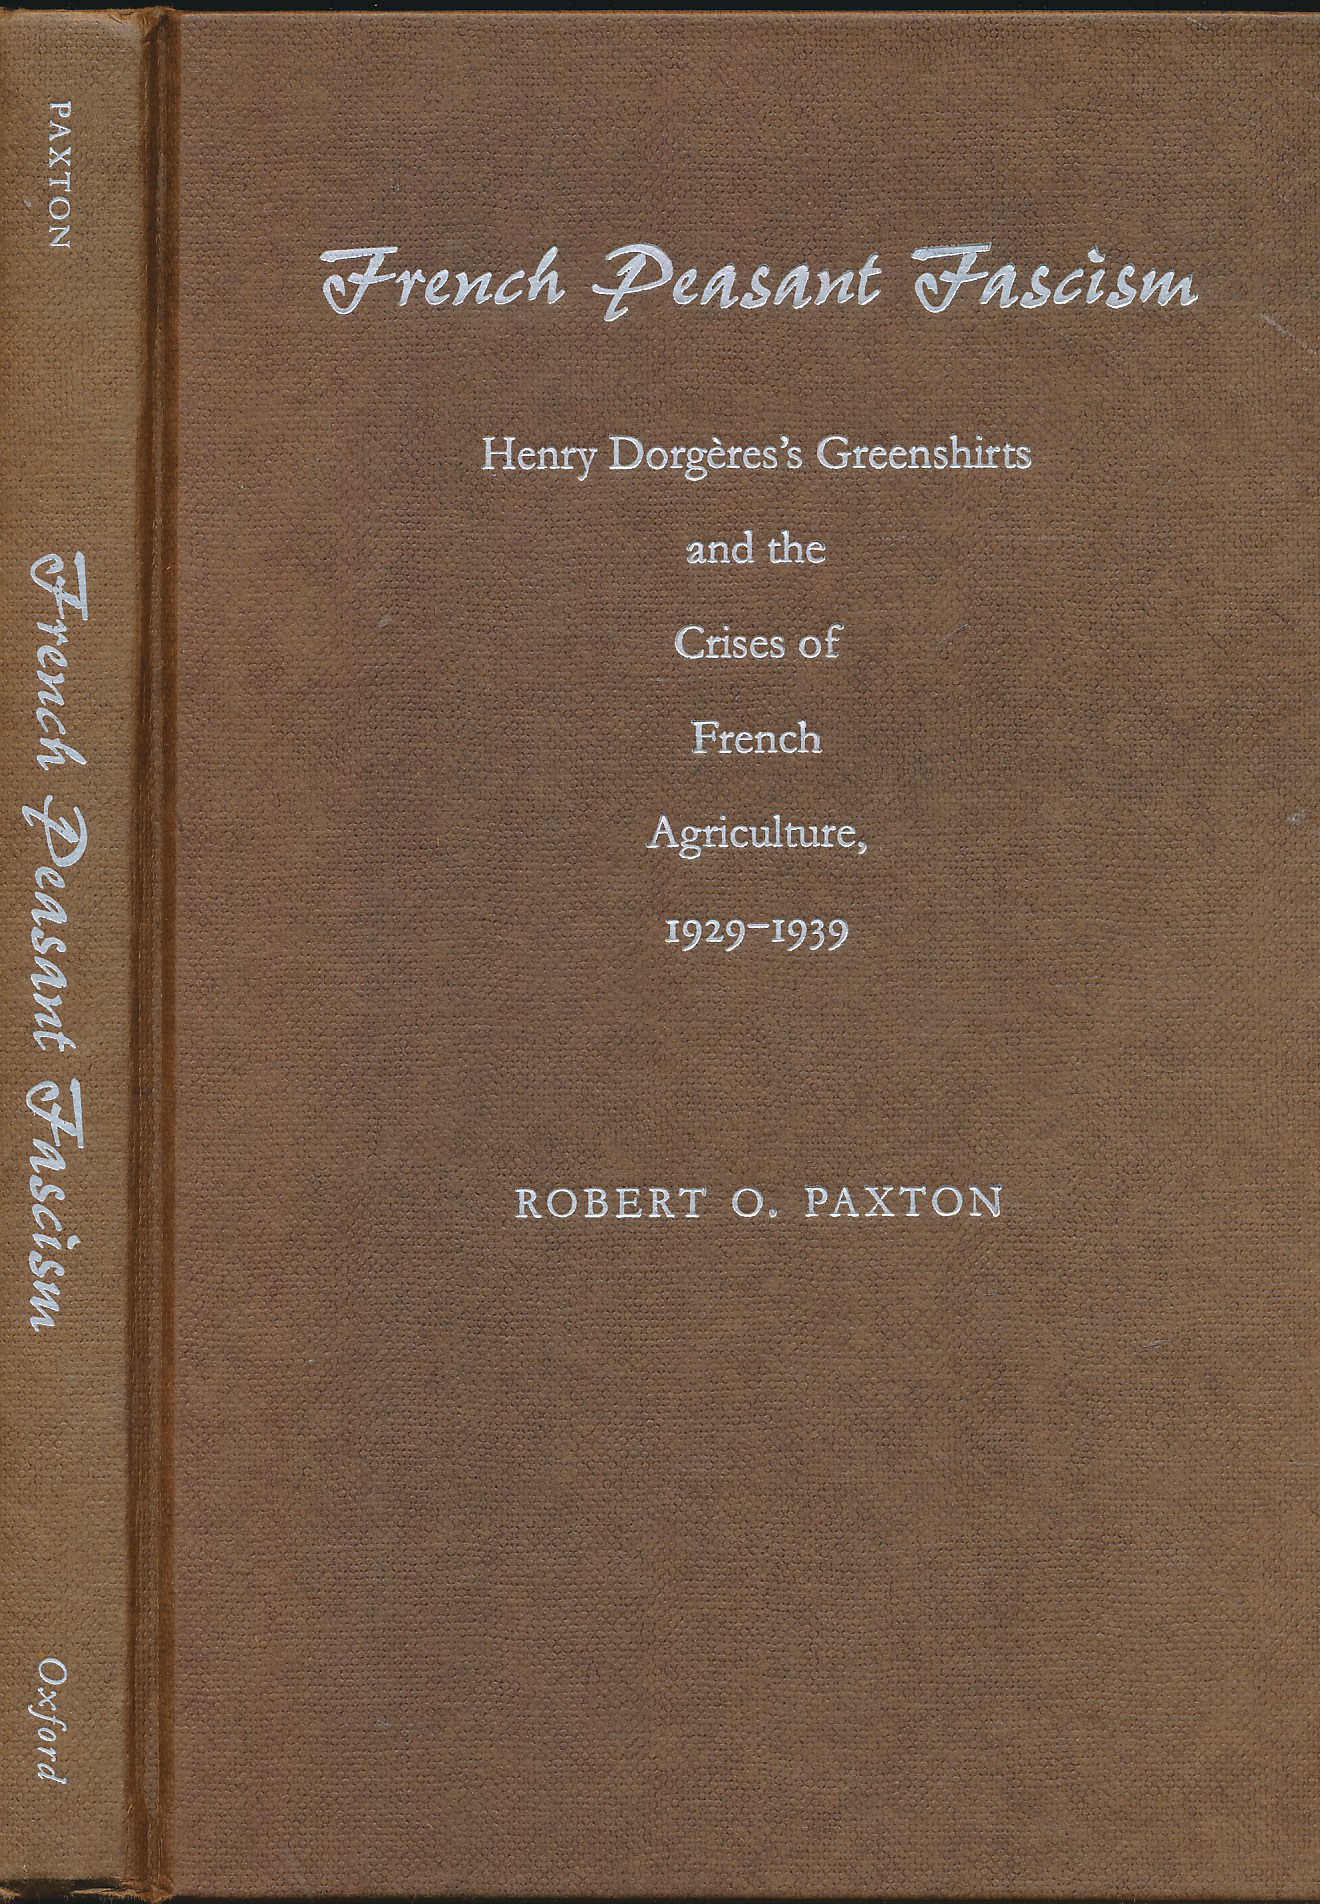 French Peasant Fascism. Henry Dorgres's Greenshirts and the Crises of French Agriculture 1929-1939